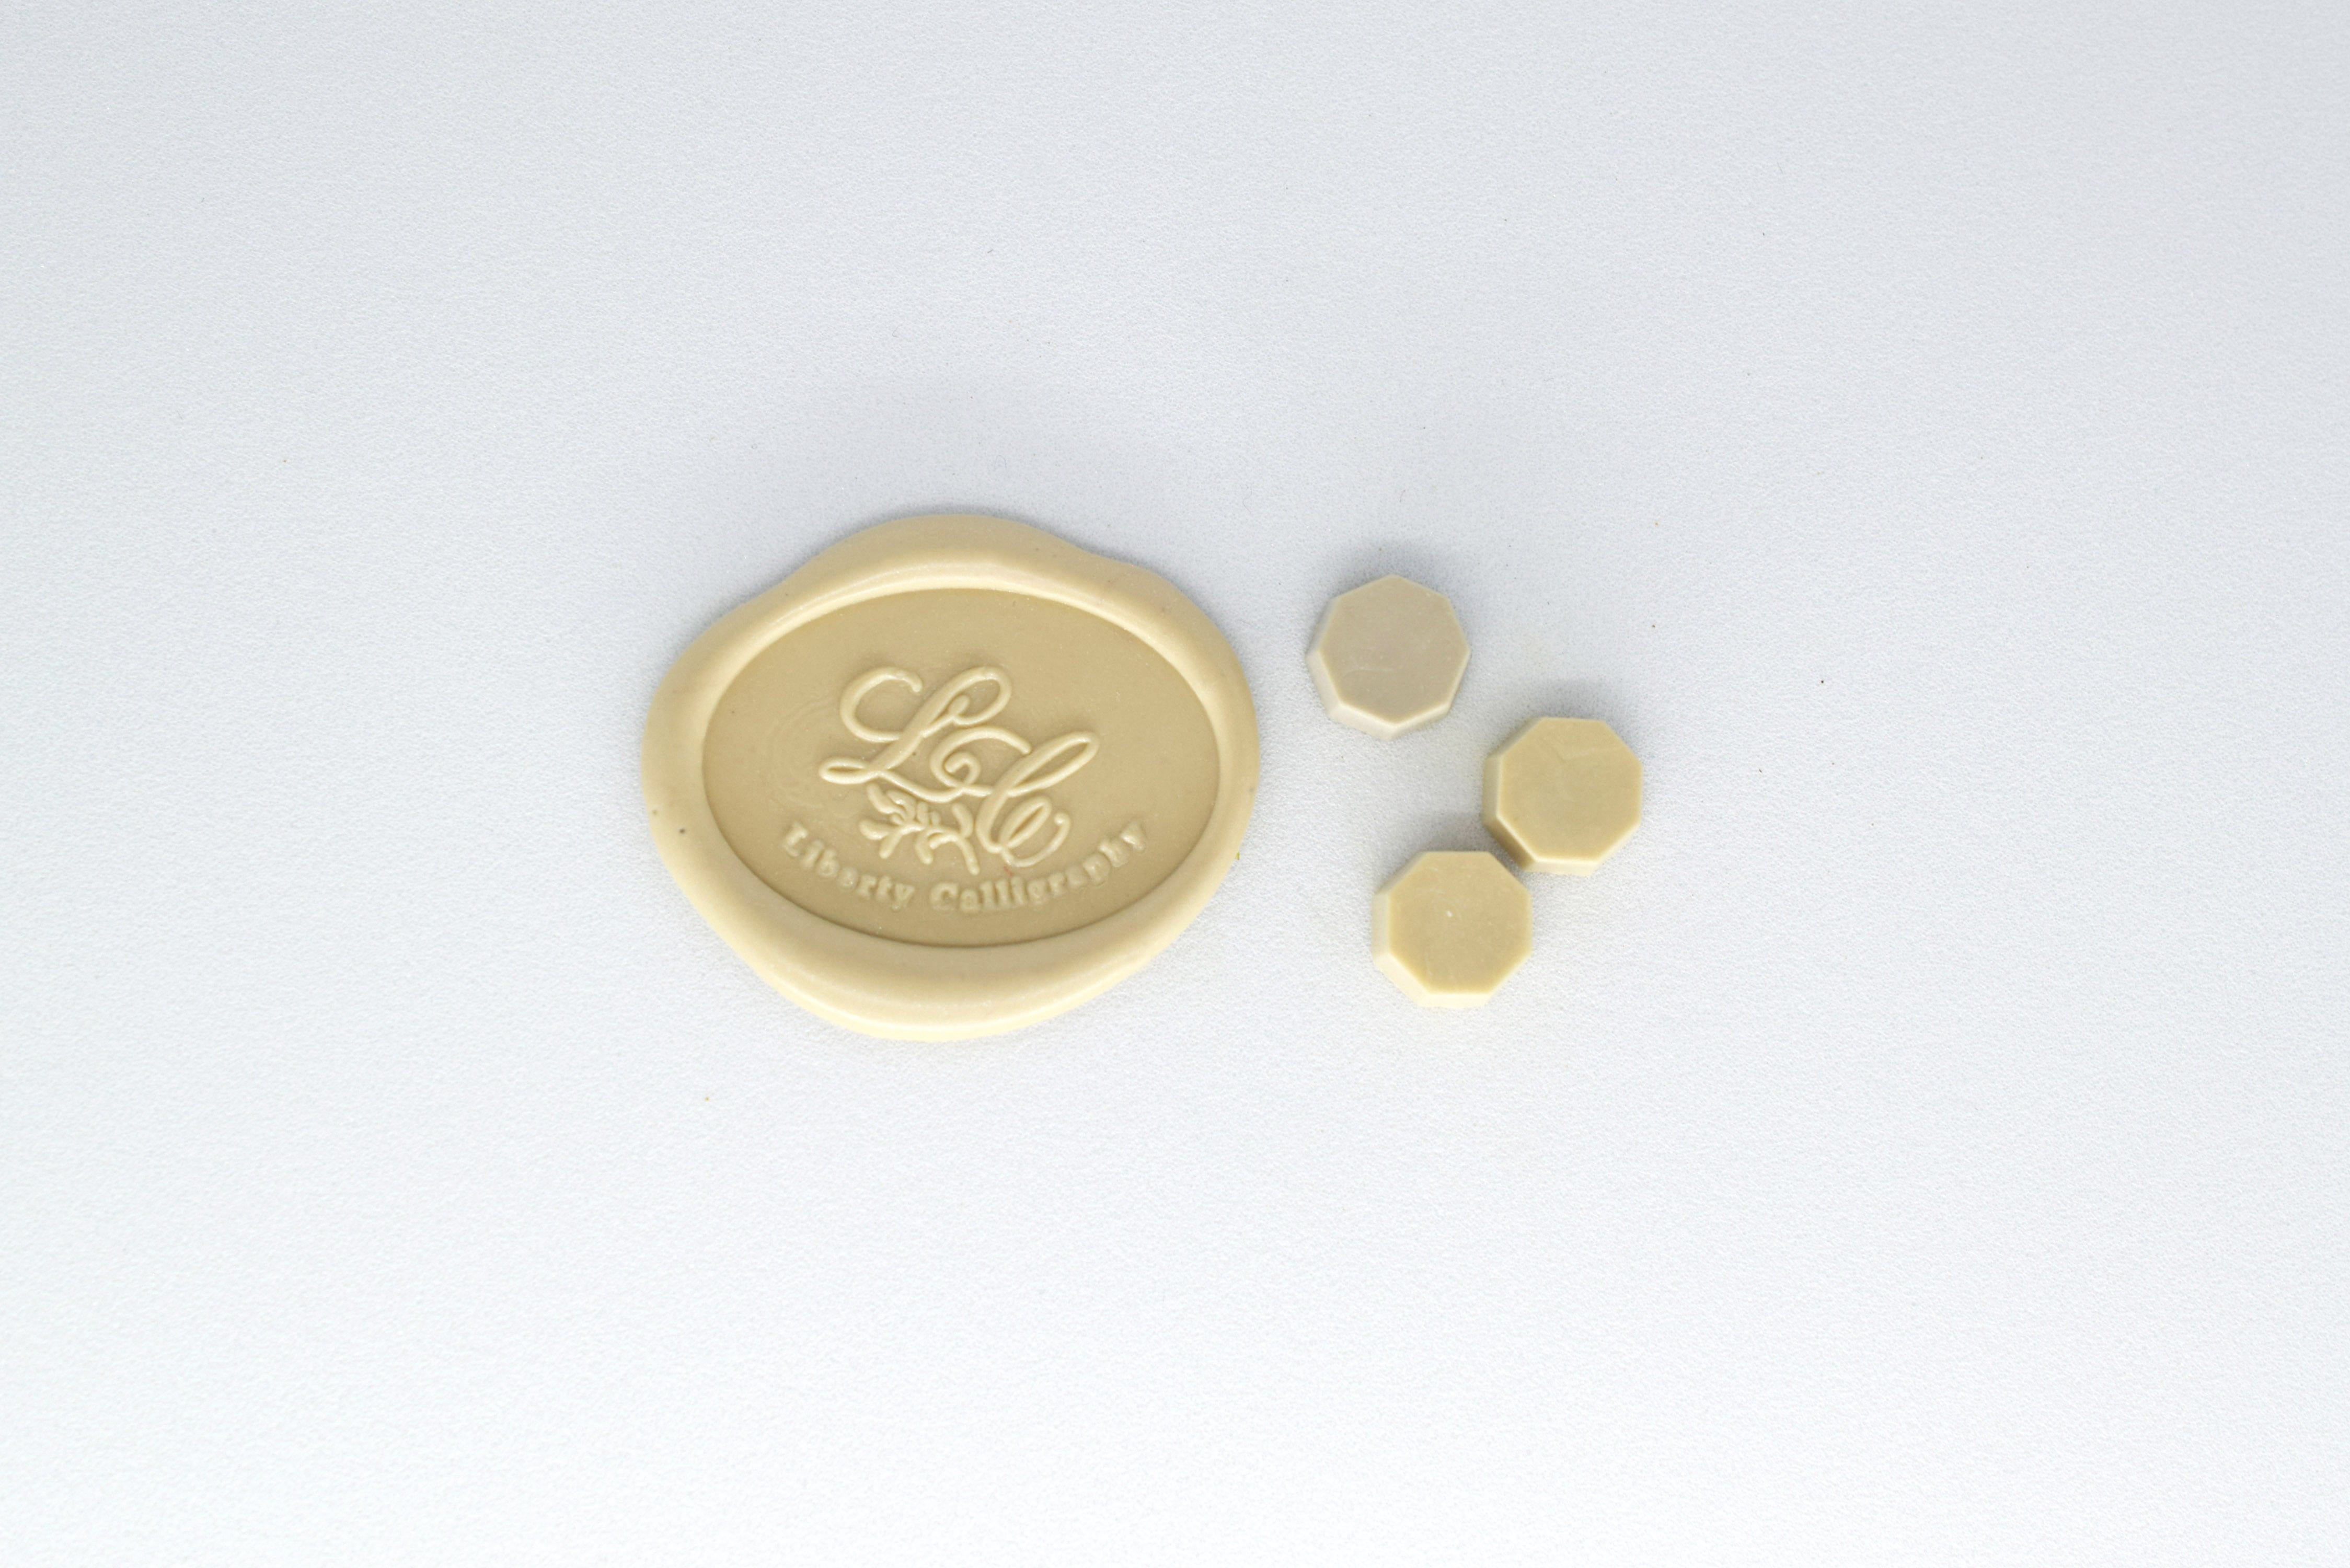 Sealing Wax Octagon series 12 Beige シーリングワックス オクタゴンシリーズ ベージュ カリグラフィー用品店  Liberty Calligraphy Online Store ｜リバティカリグラフィー